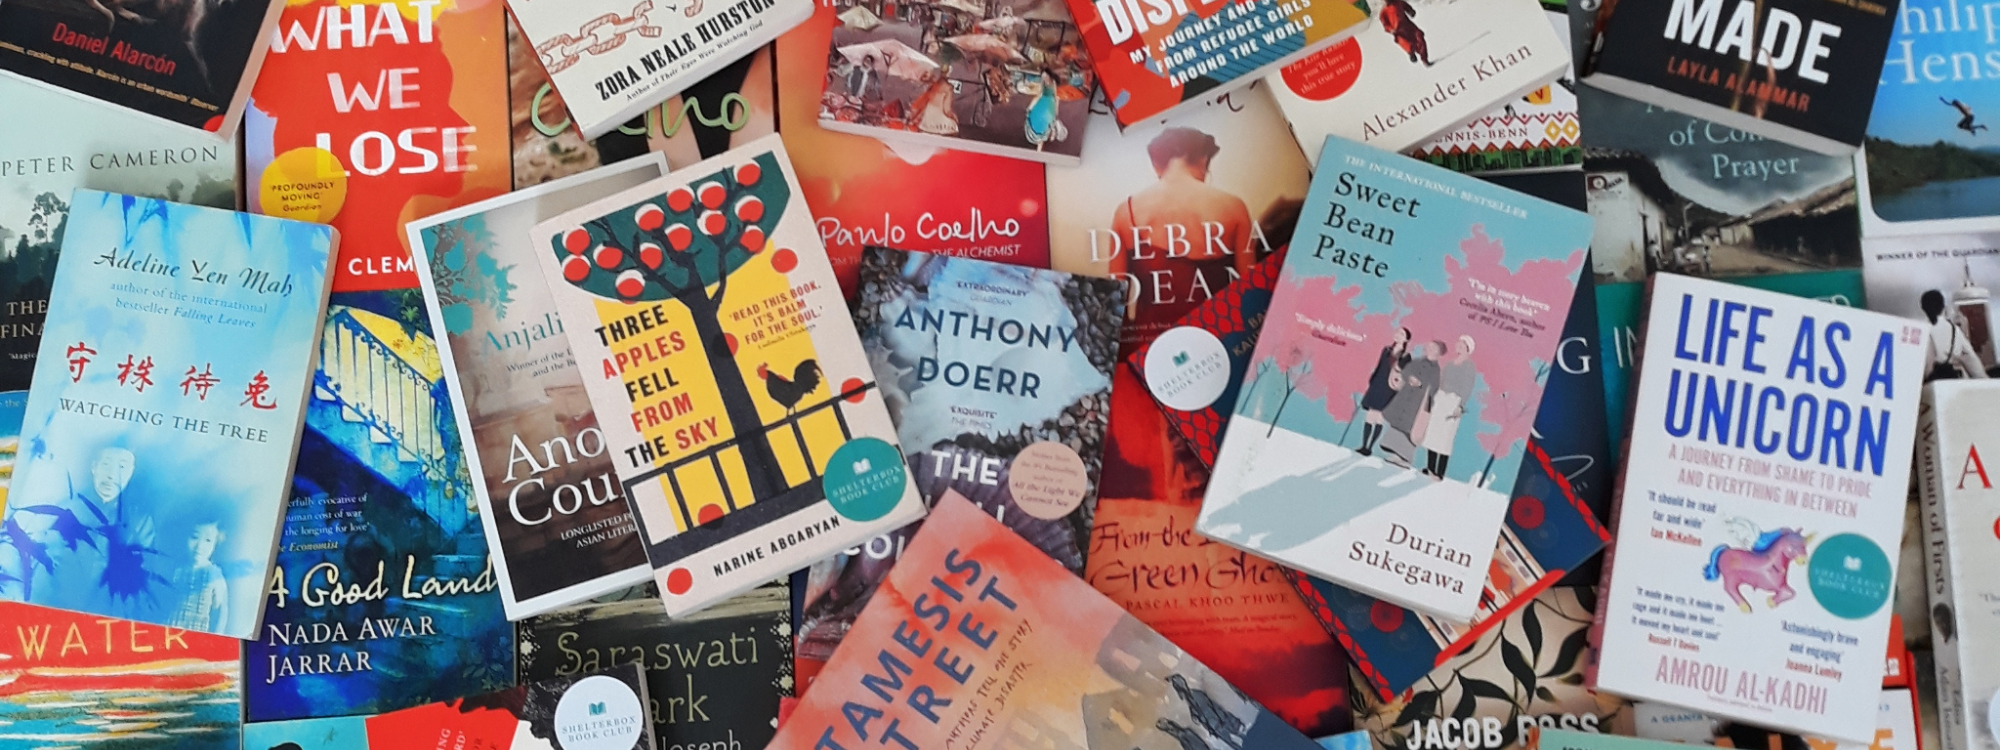 A montage of different book covers featured as part of the ShelterBox Book Club